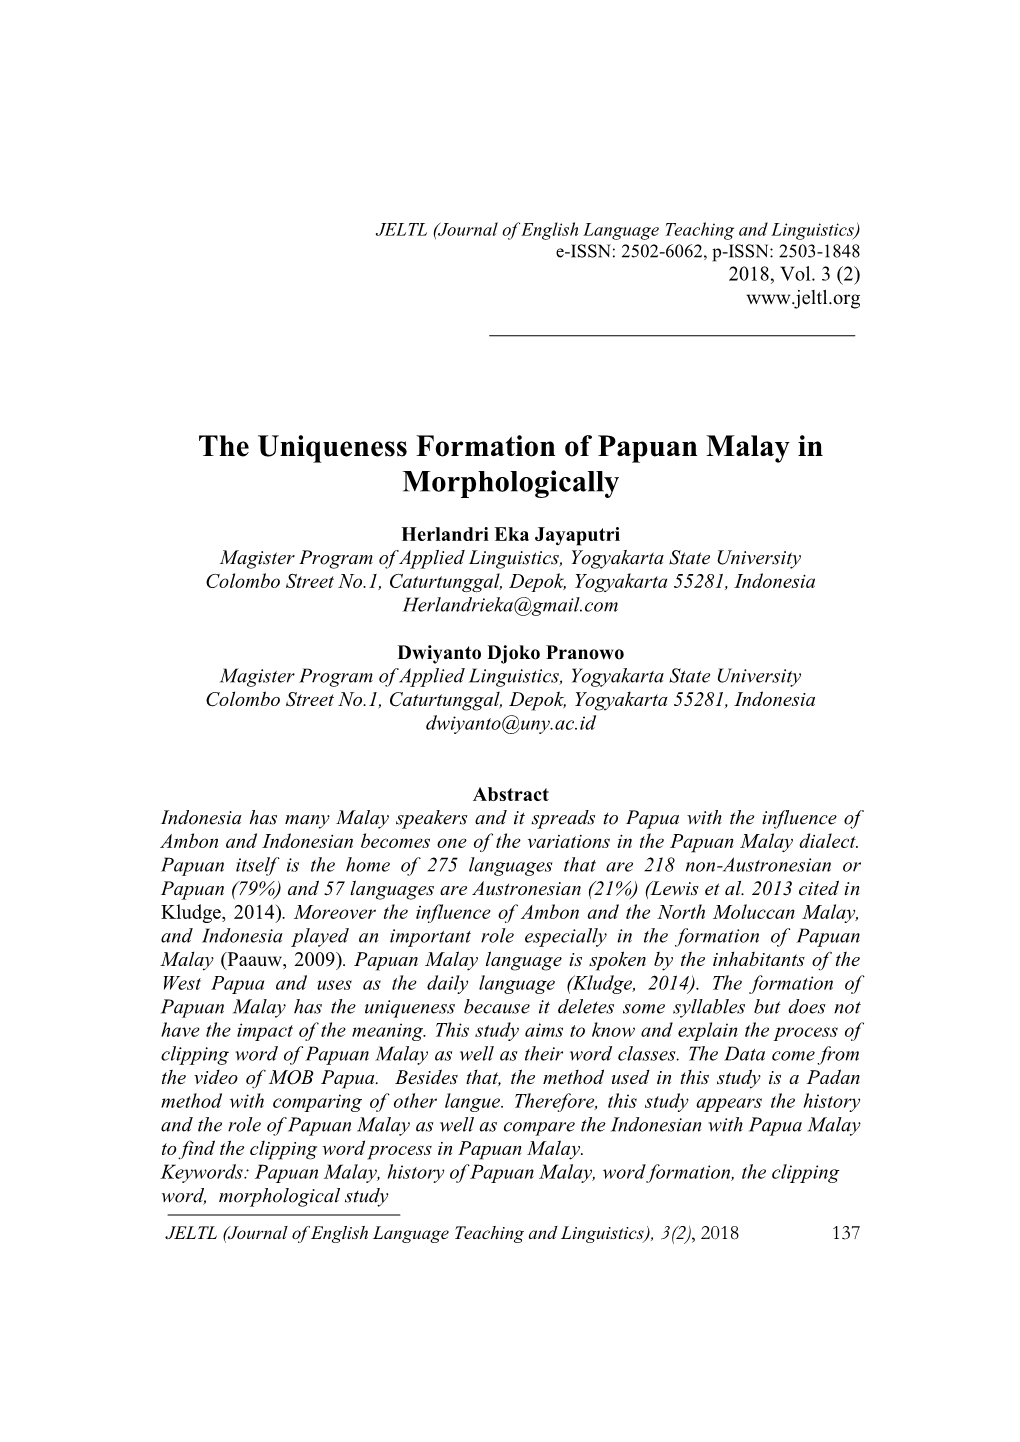 The Uniqueness Formation of Papuan Malay in Morphologically